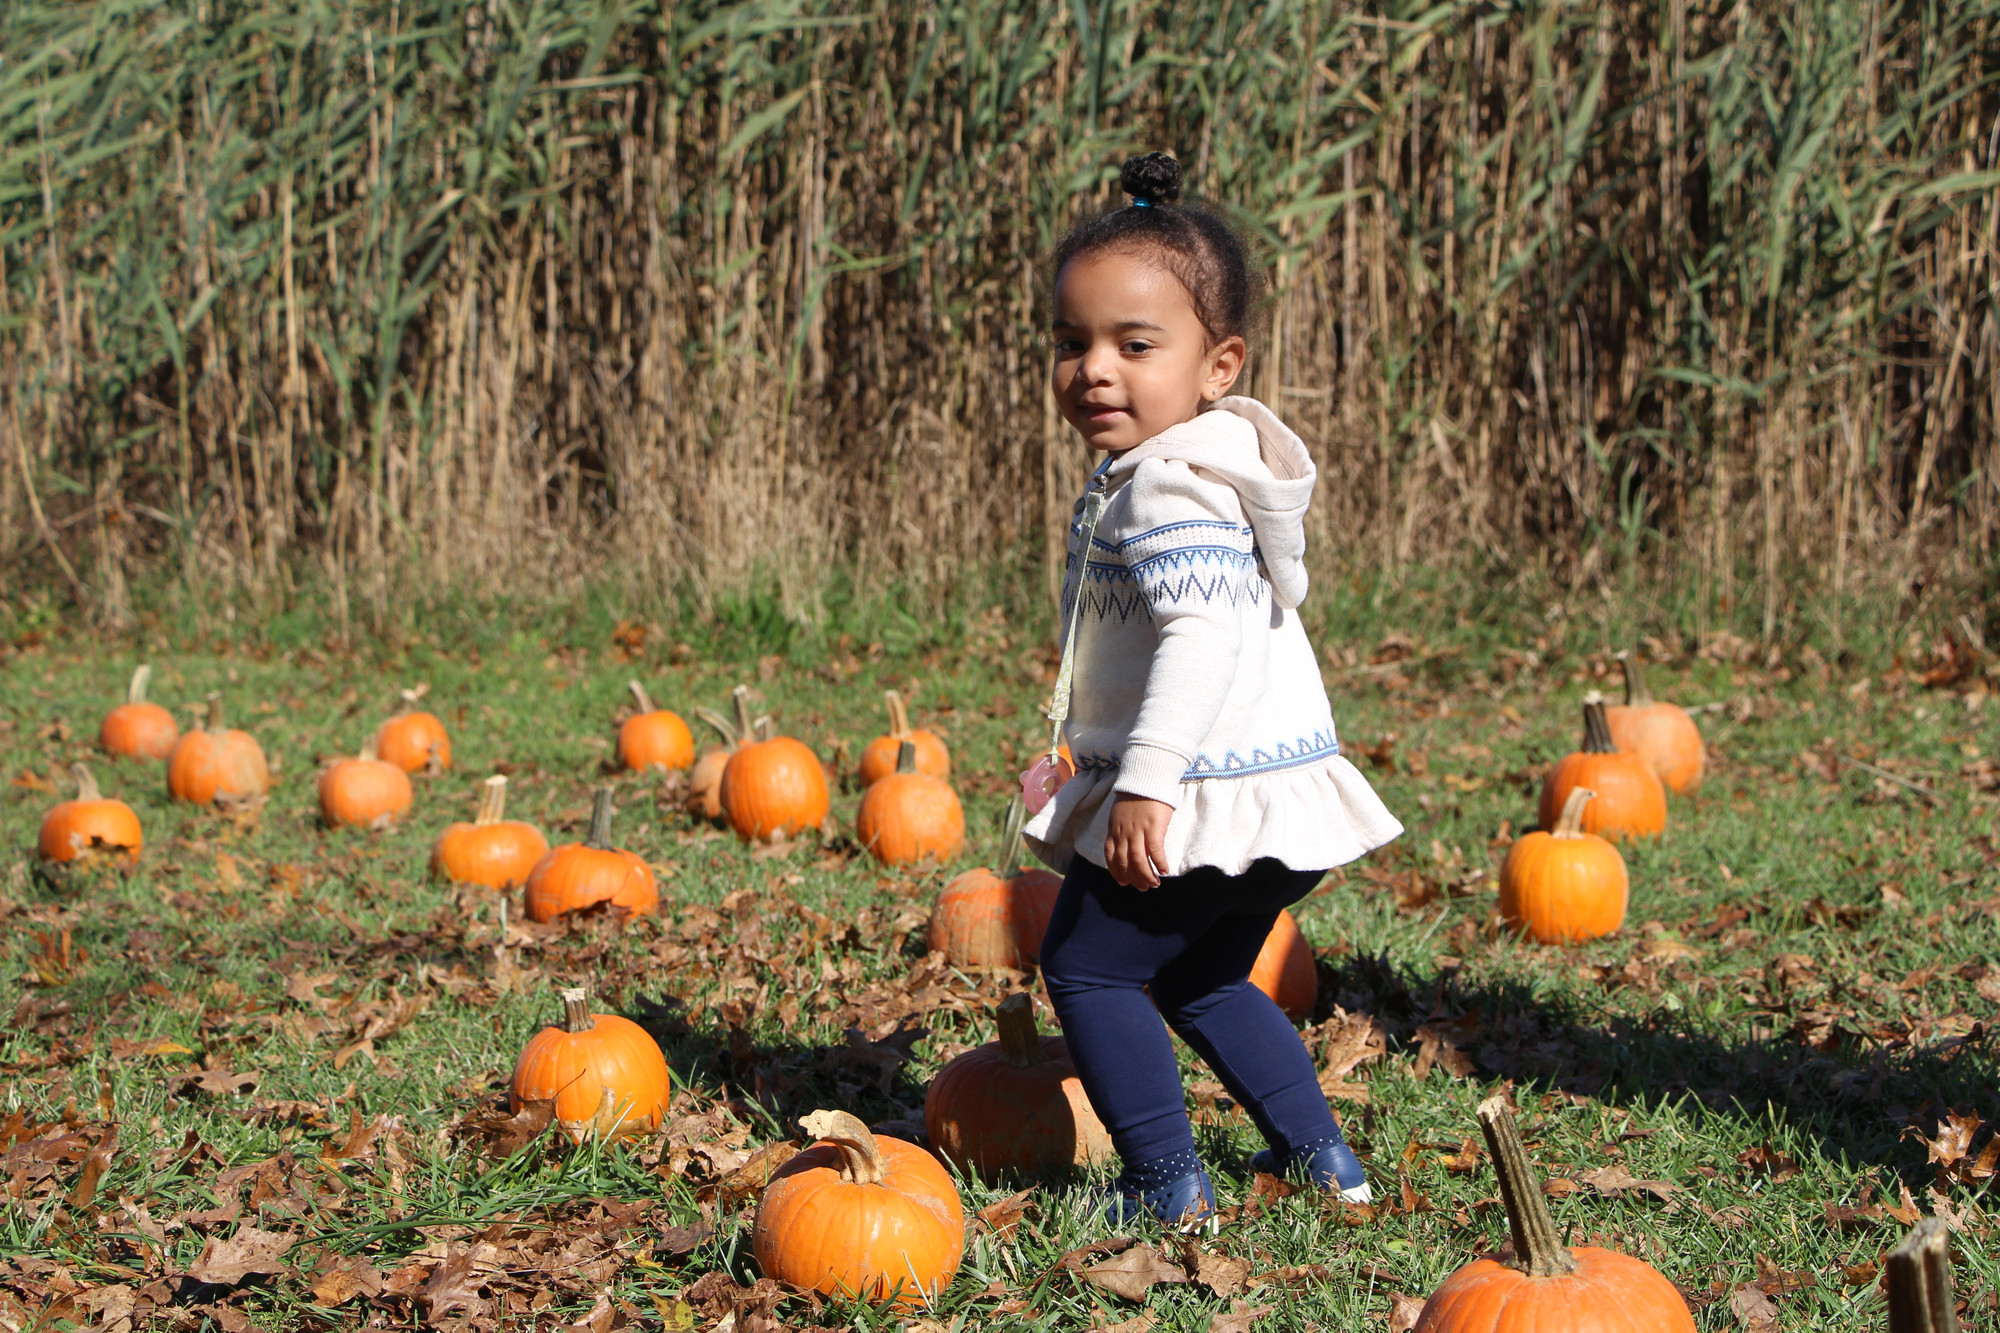 Madison Nunez, 20 months old, scouted the pumpkin patch for the perfect pumpkin.